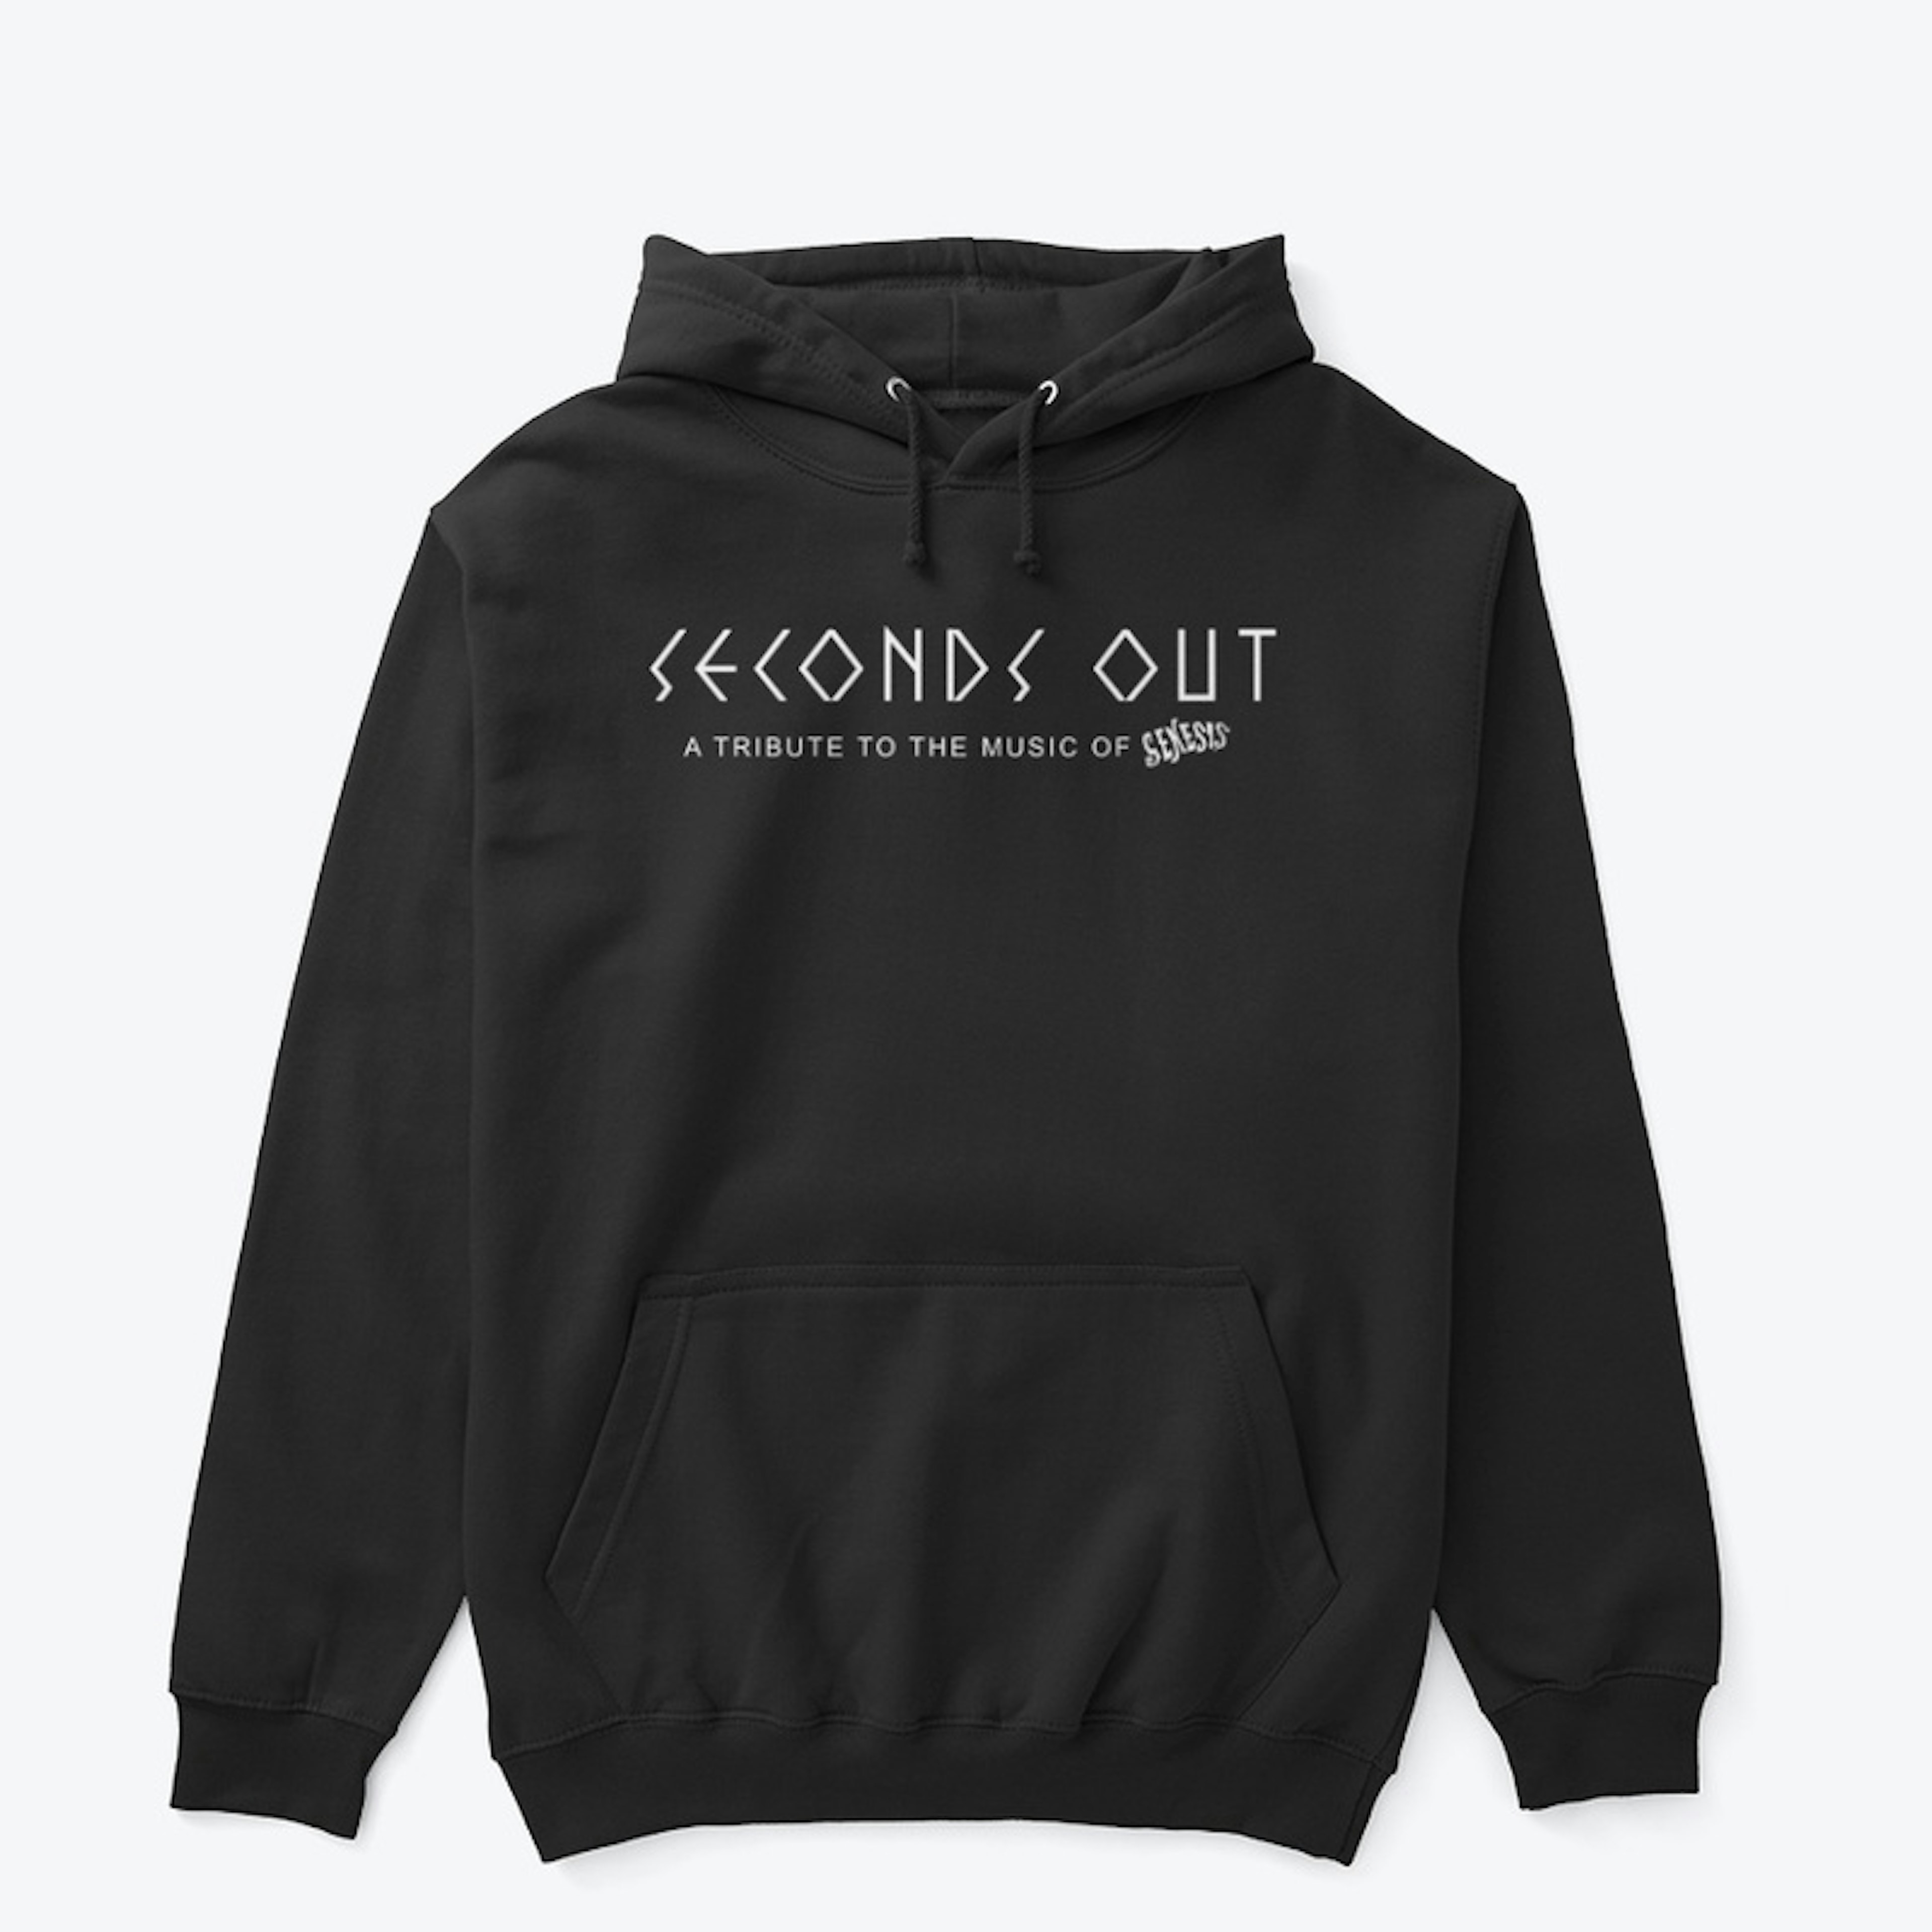 Seconds Out - Black & White Logo